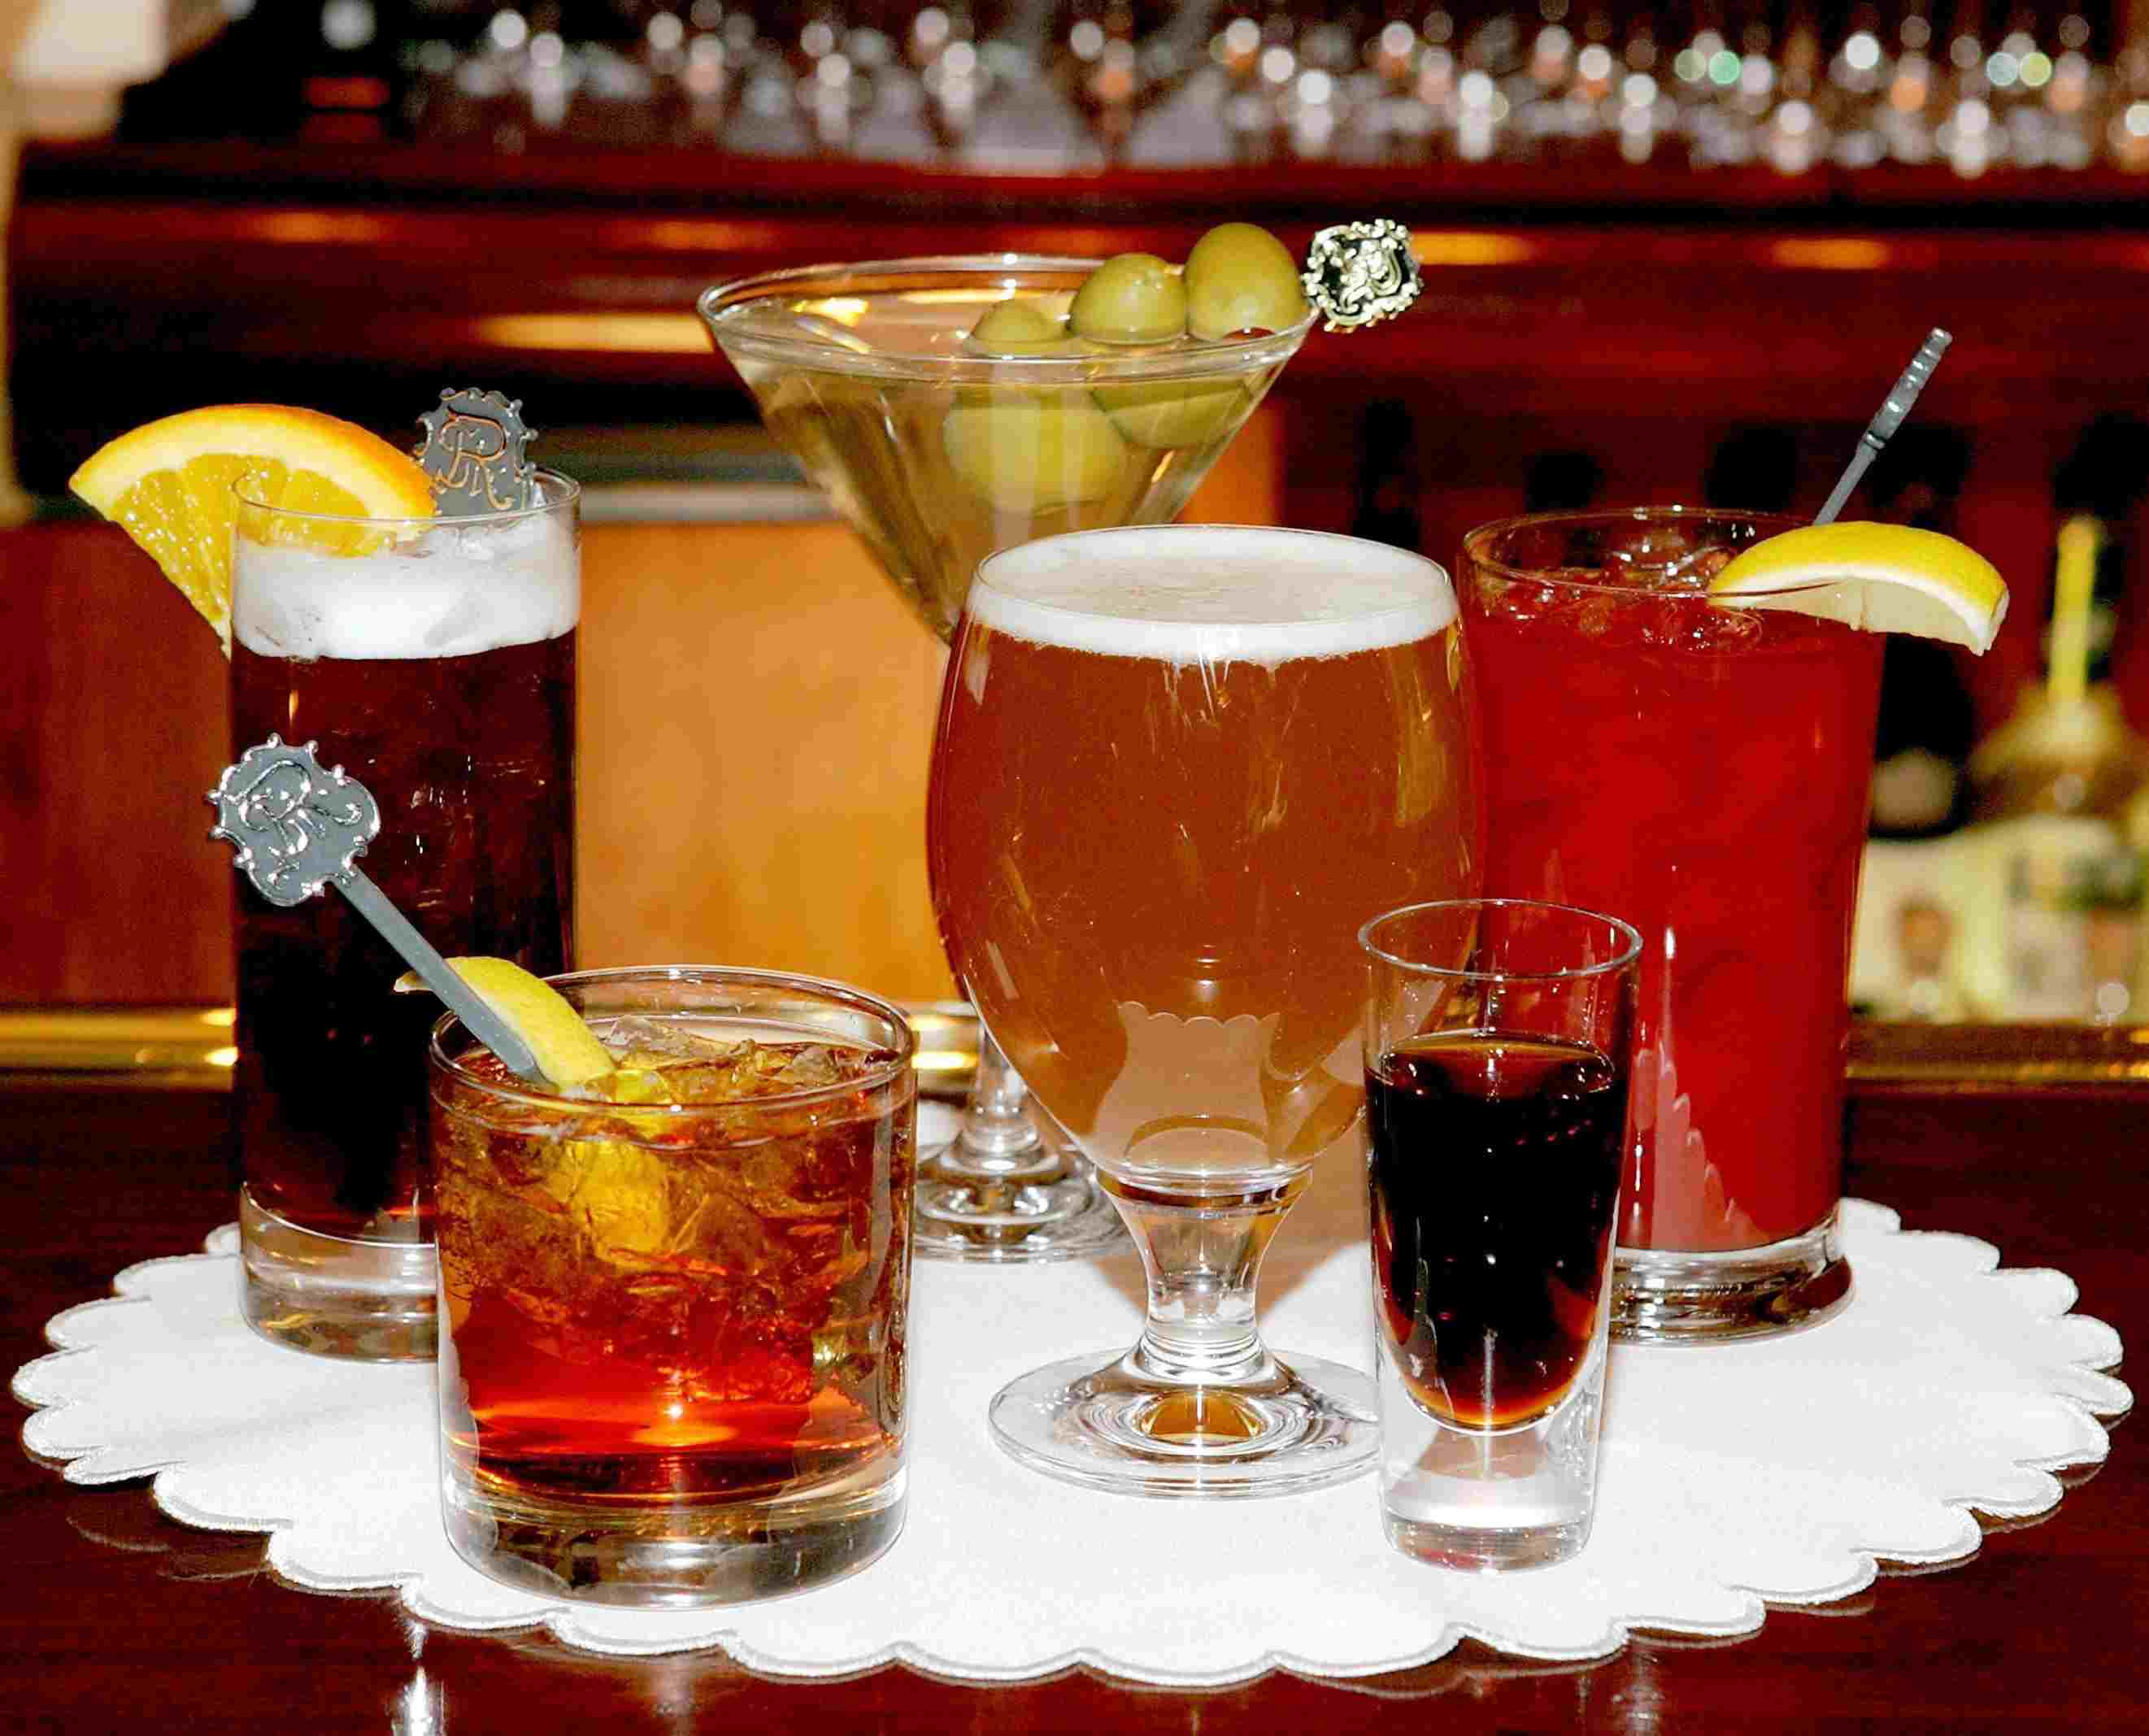 A variety of alcoholic drinks on a table, including beer, shots, and hard liquor., also toxic to dogs